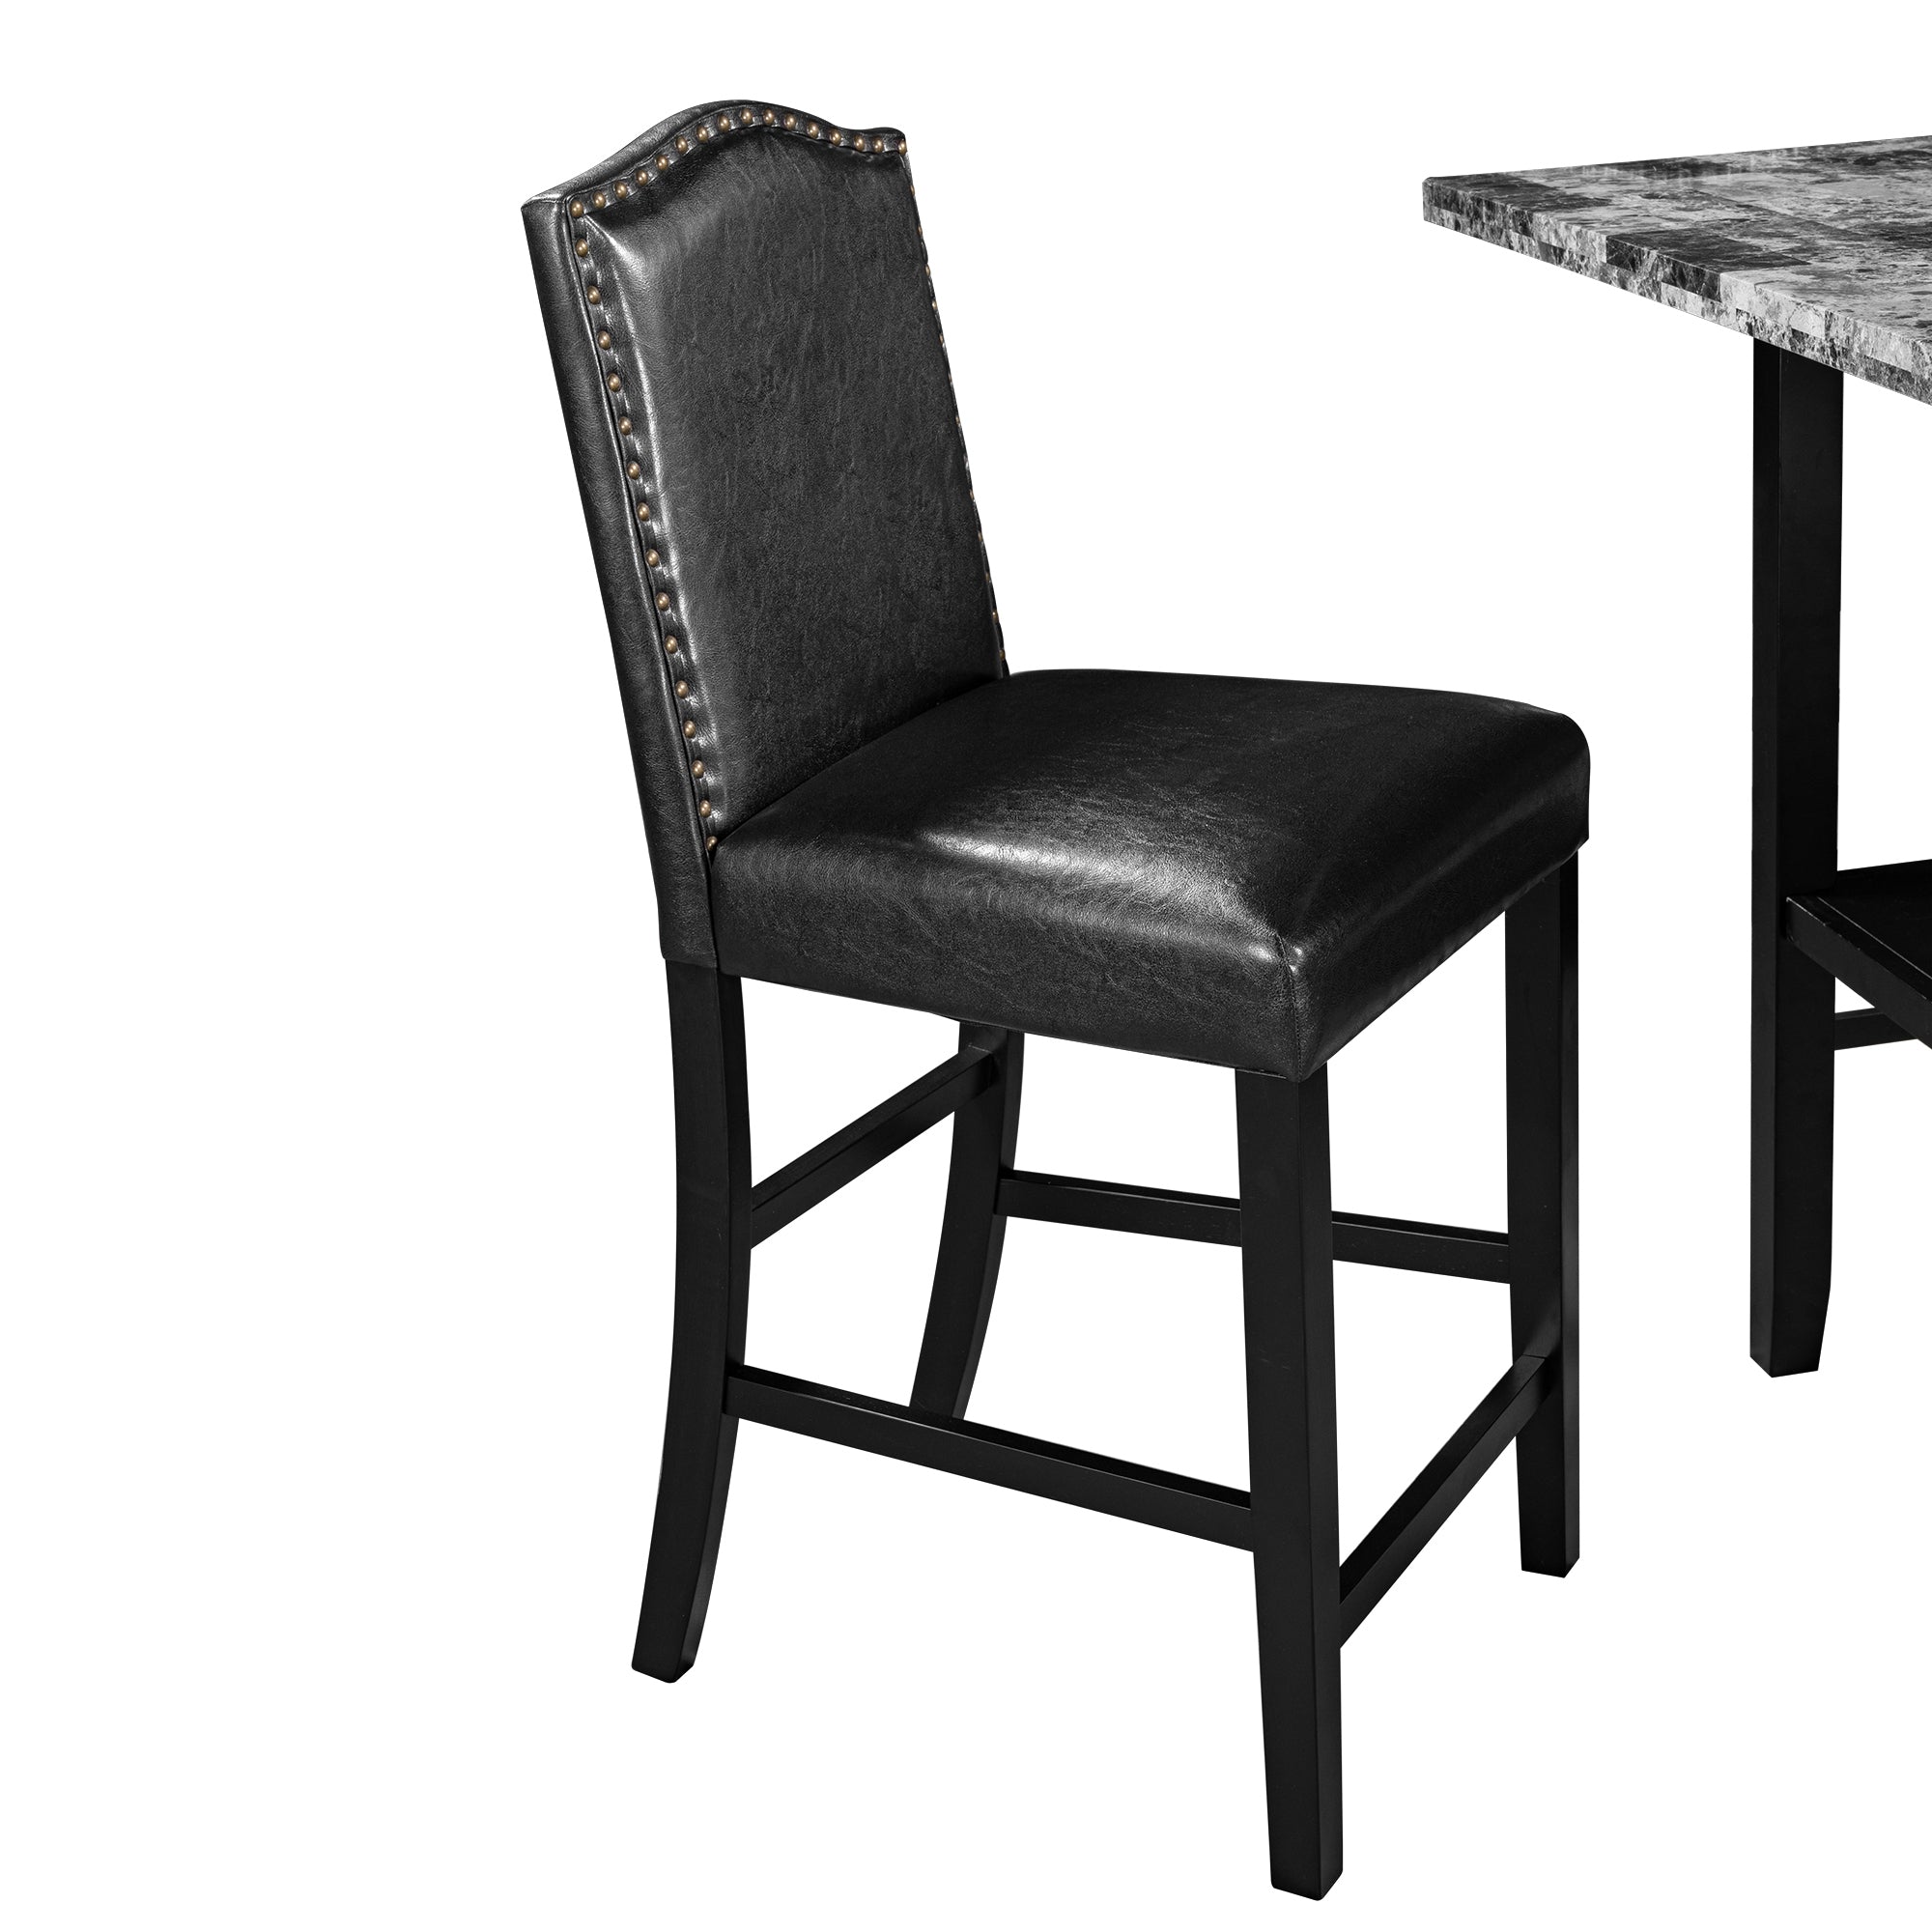 TOPMAX 5 Piece Dining Set with Matching Chairs and Bottom Shelf for Dining Room Chair (Black) ,Table (Gray)